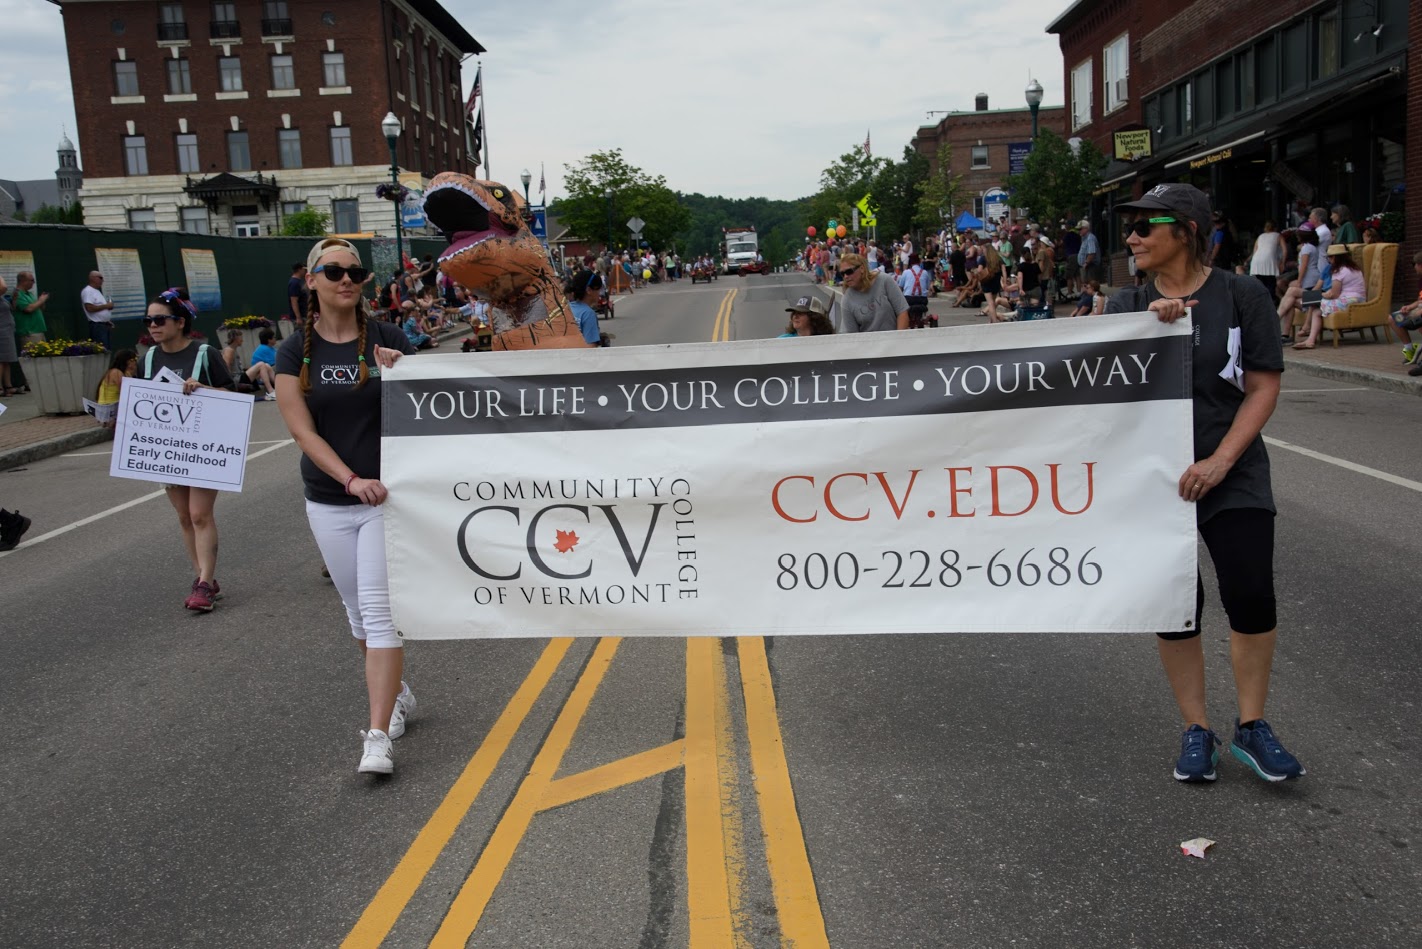 CCV-Newport staff members Alissa Eversole and Cindy Swanson represented CCV at Newport's Centennial Parade on Saturday, June 29th, along with students, alumni, and fellow staff.